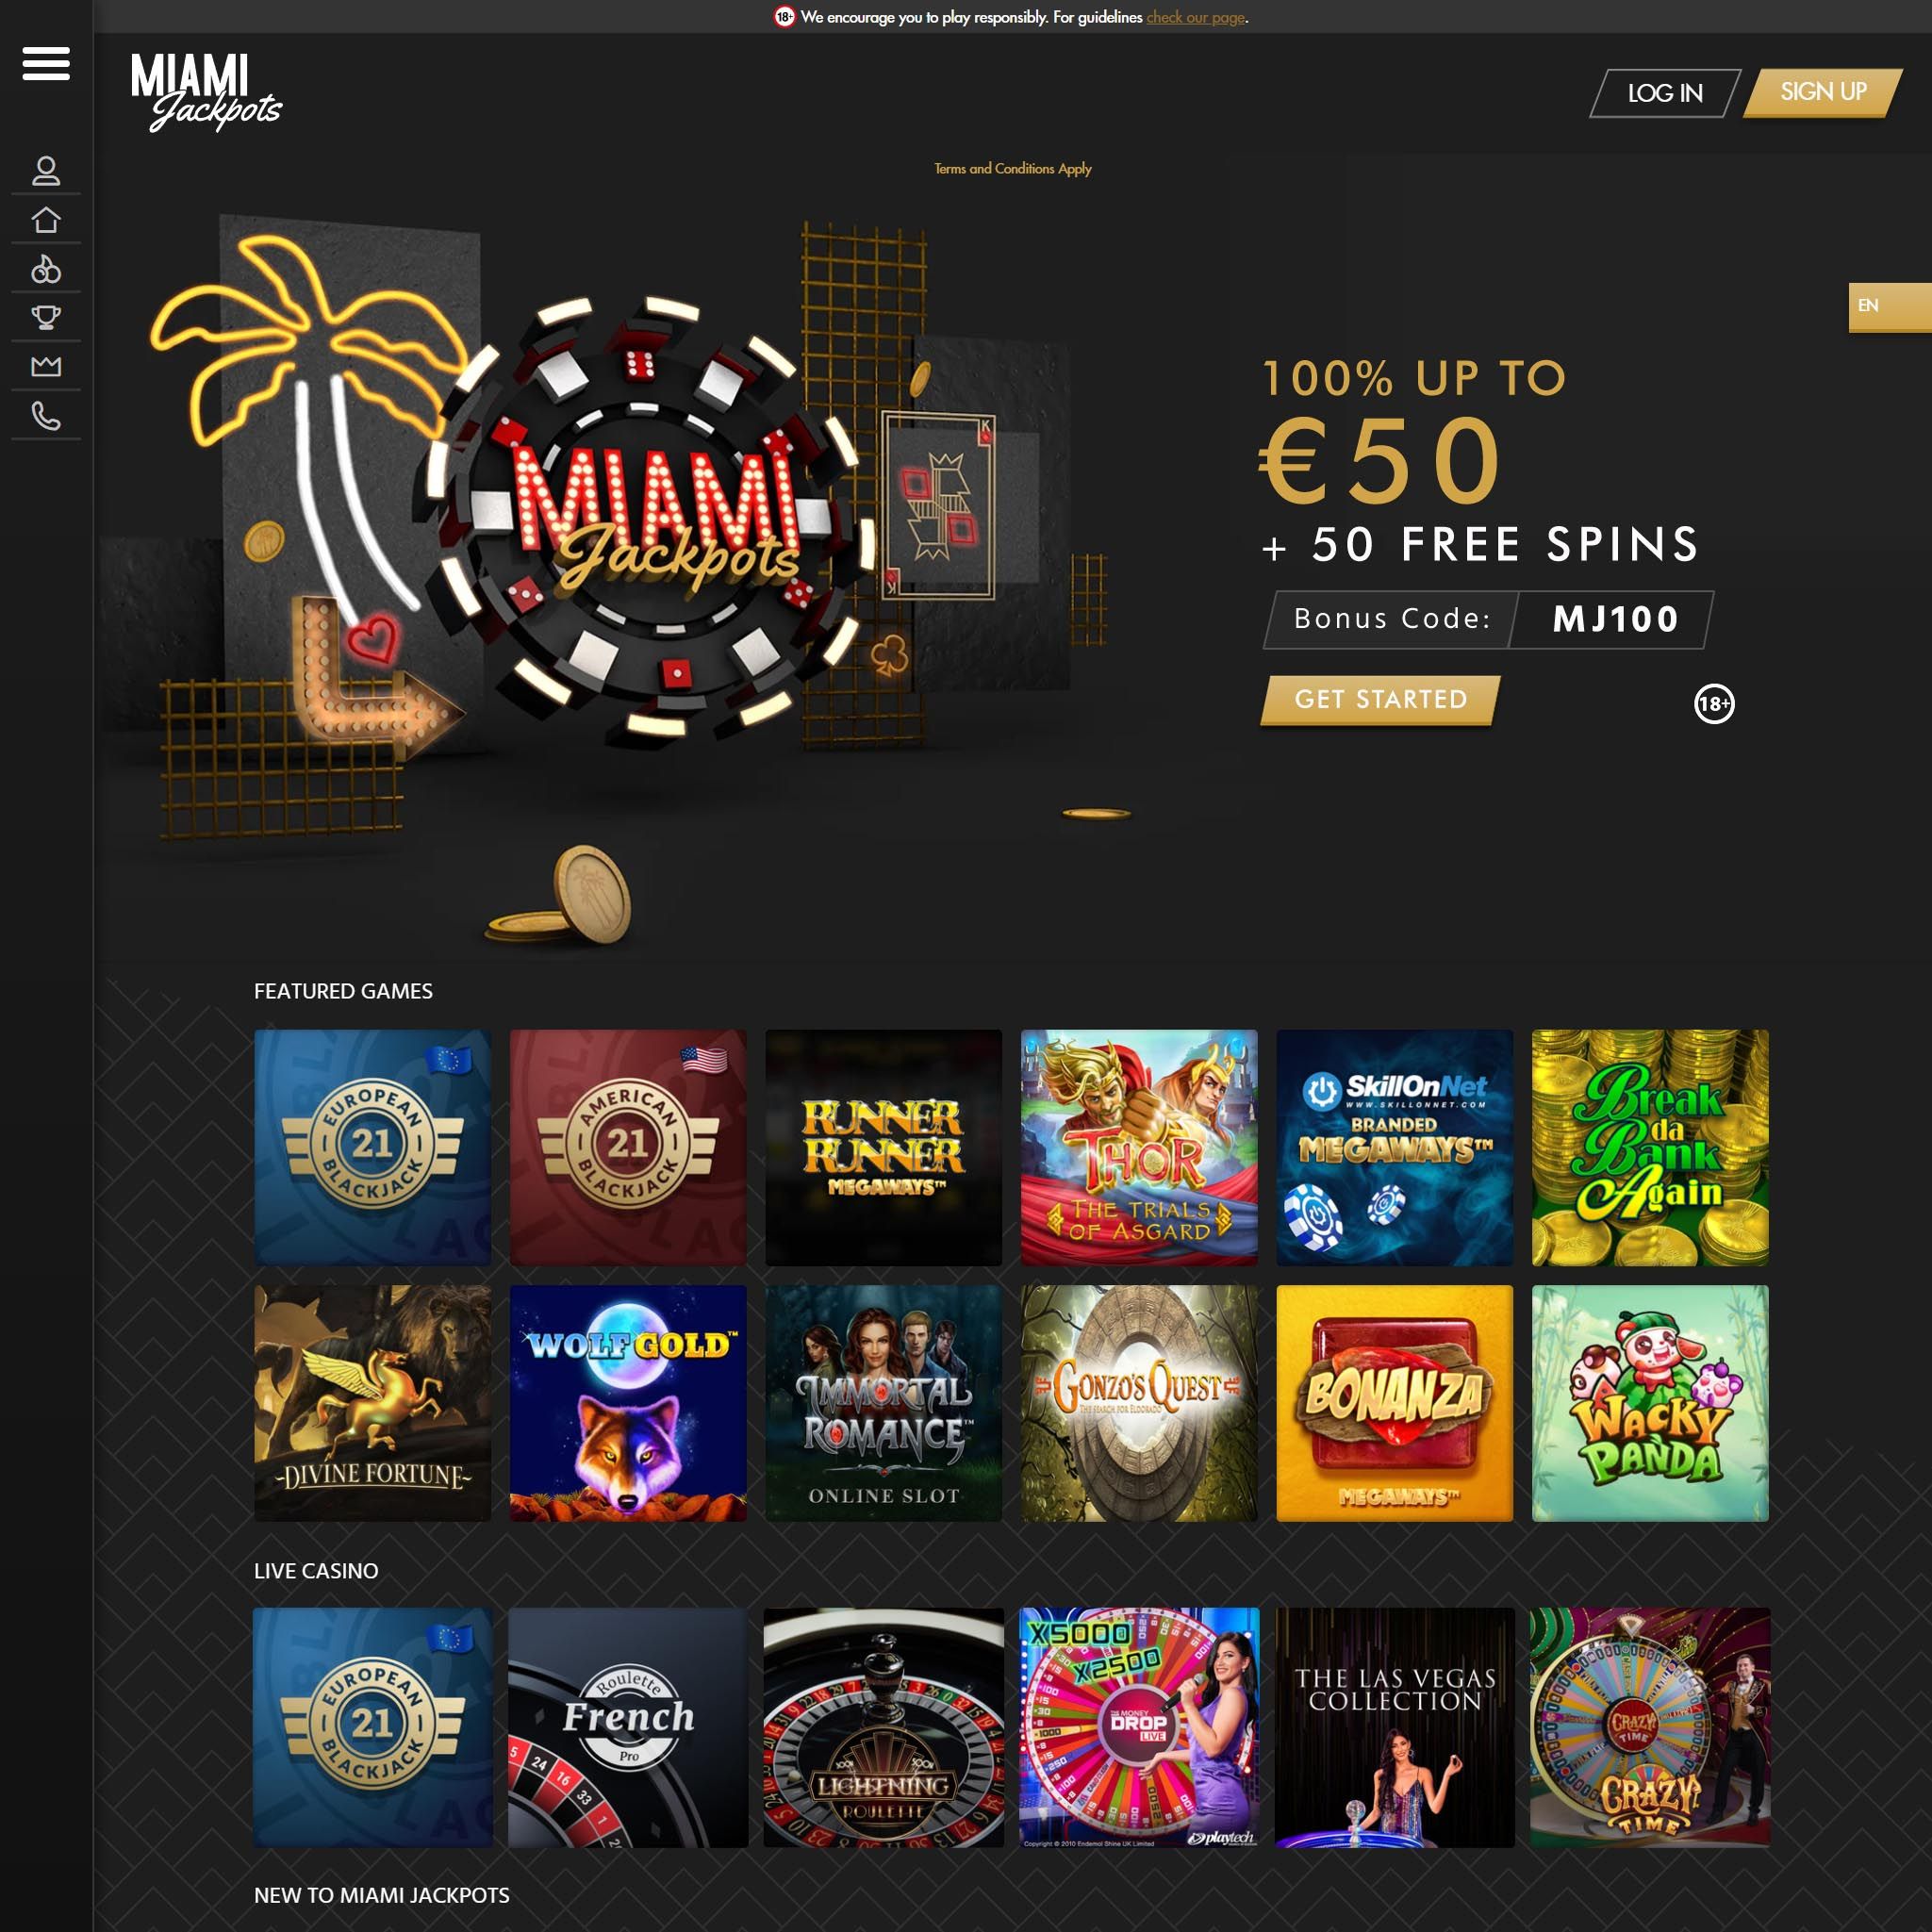 Miami Jackpots review by Mr. Gamble